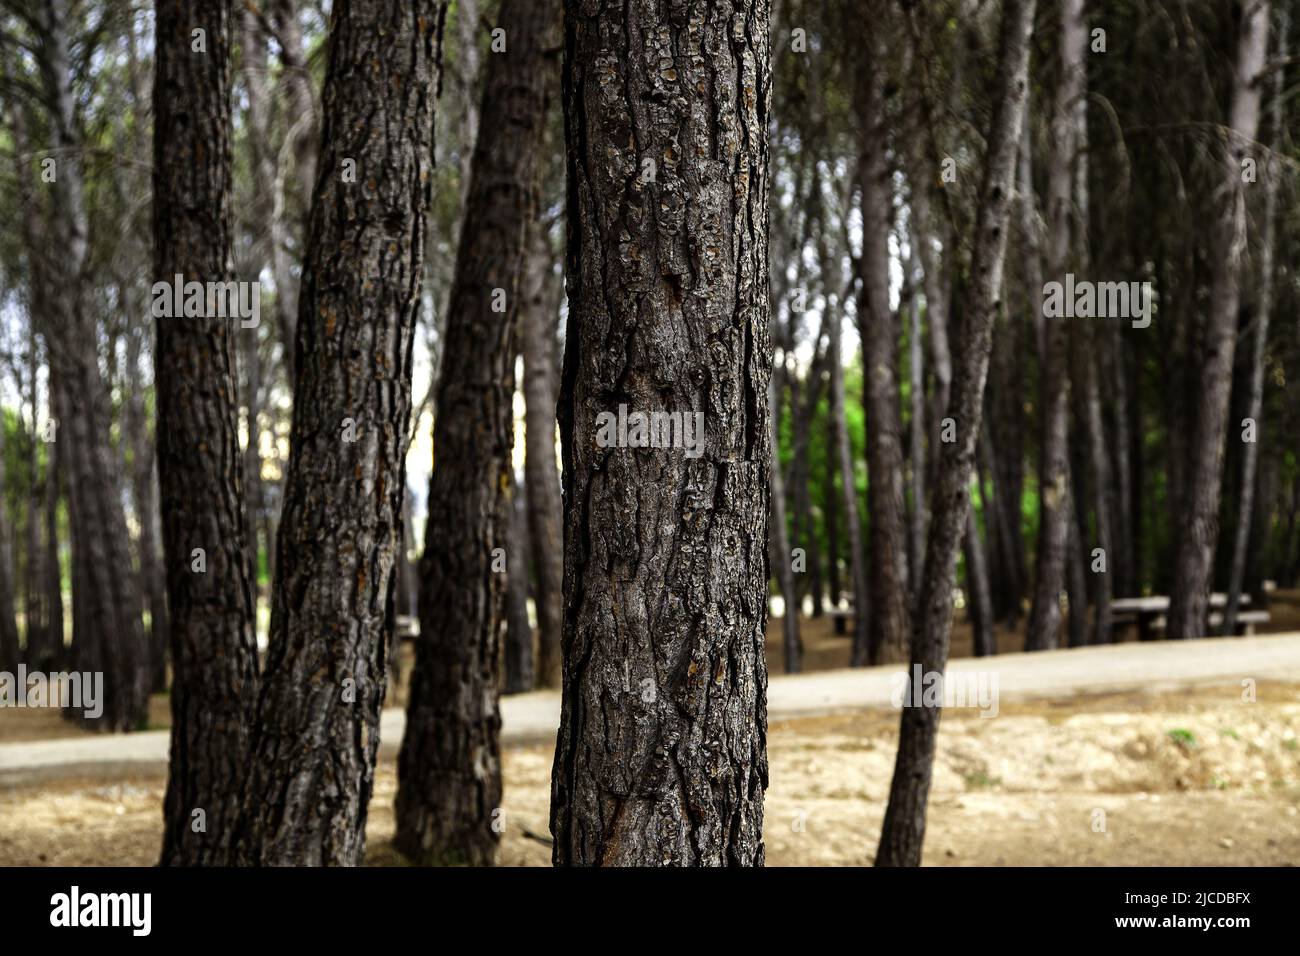 Detail of lumber industry, deforestation and destruction of the environment Stock Photo